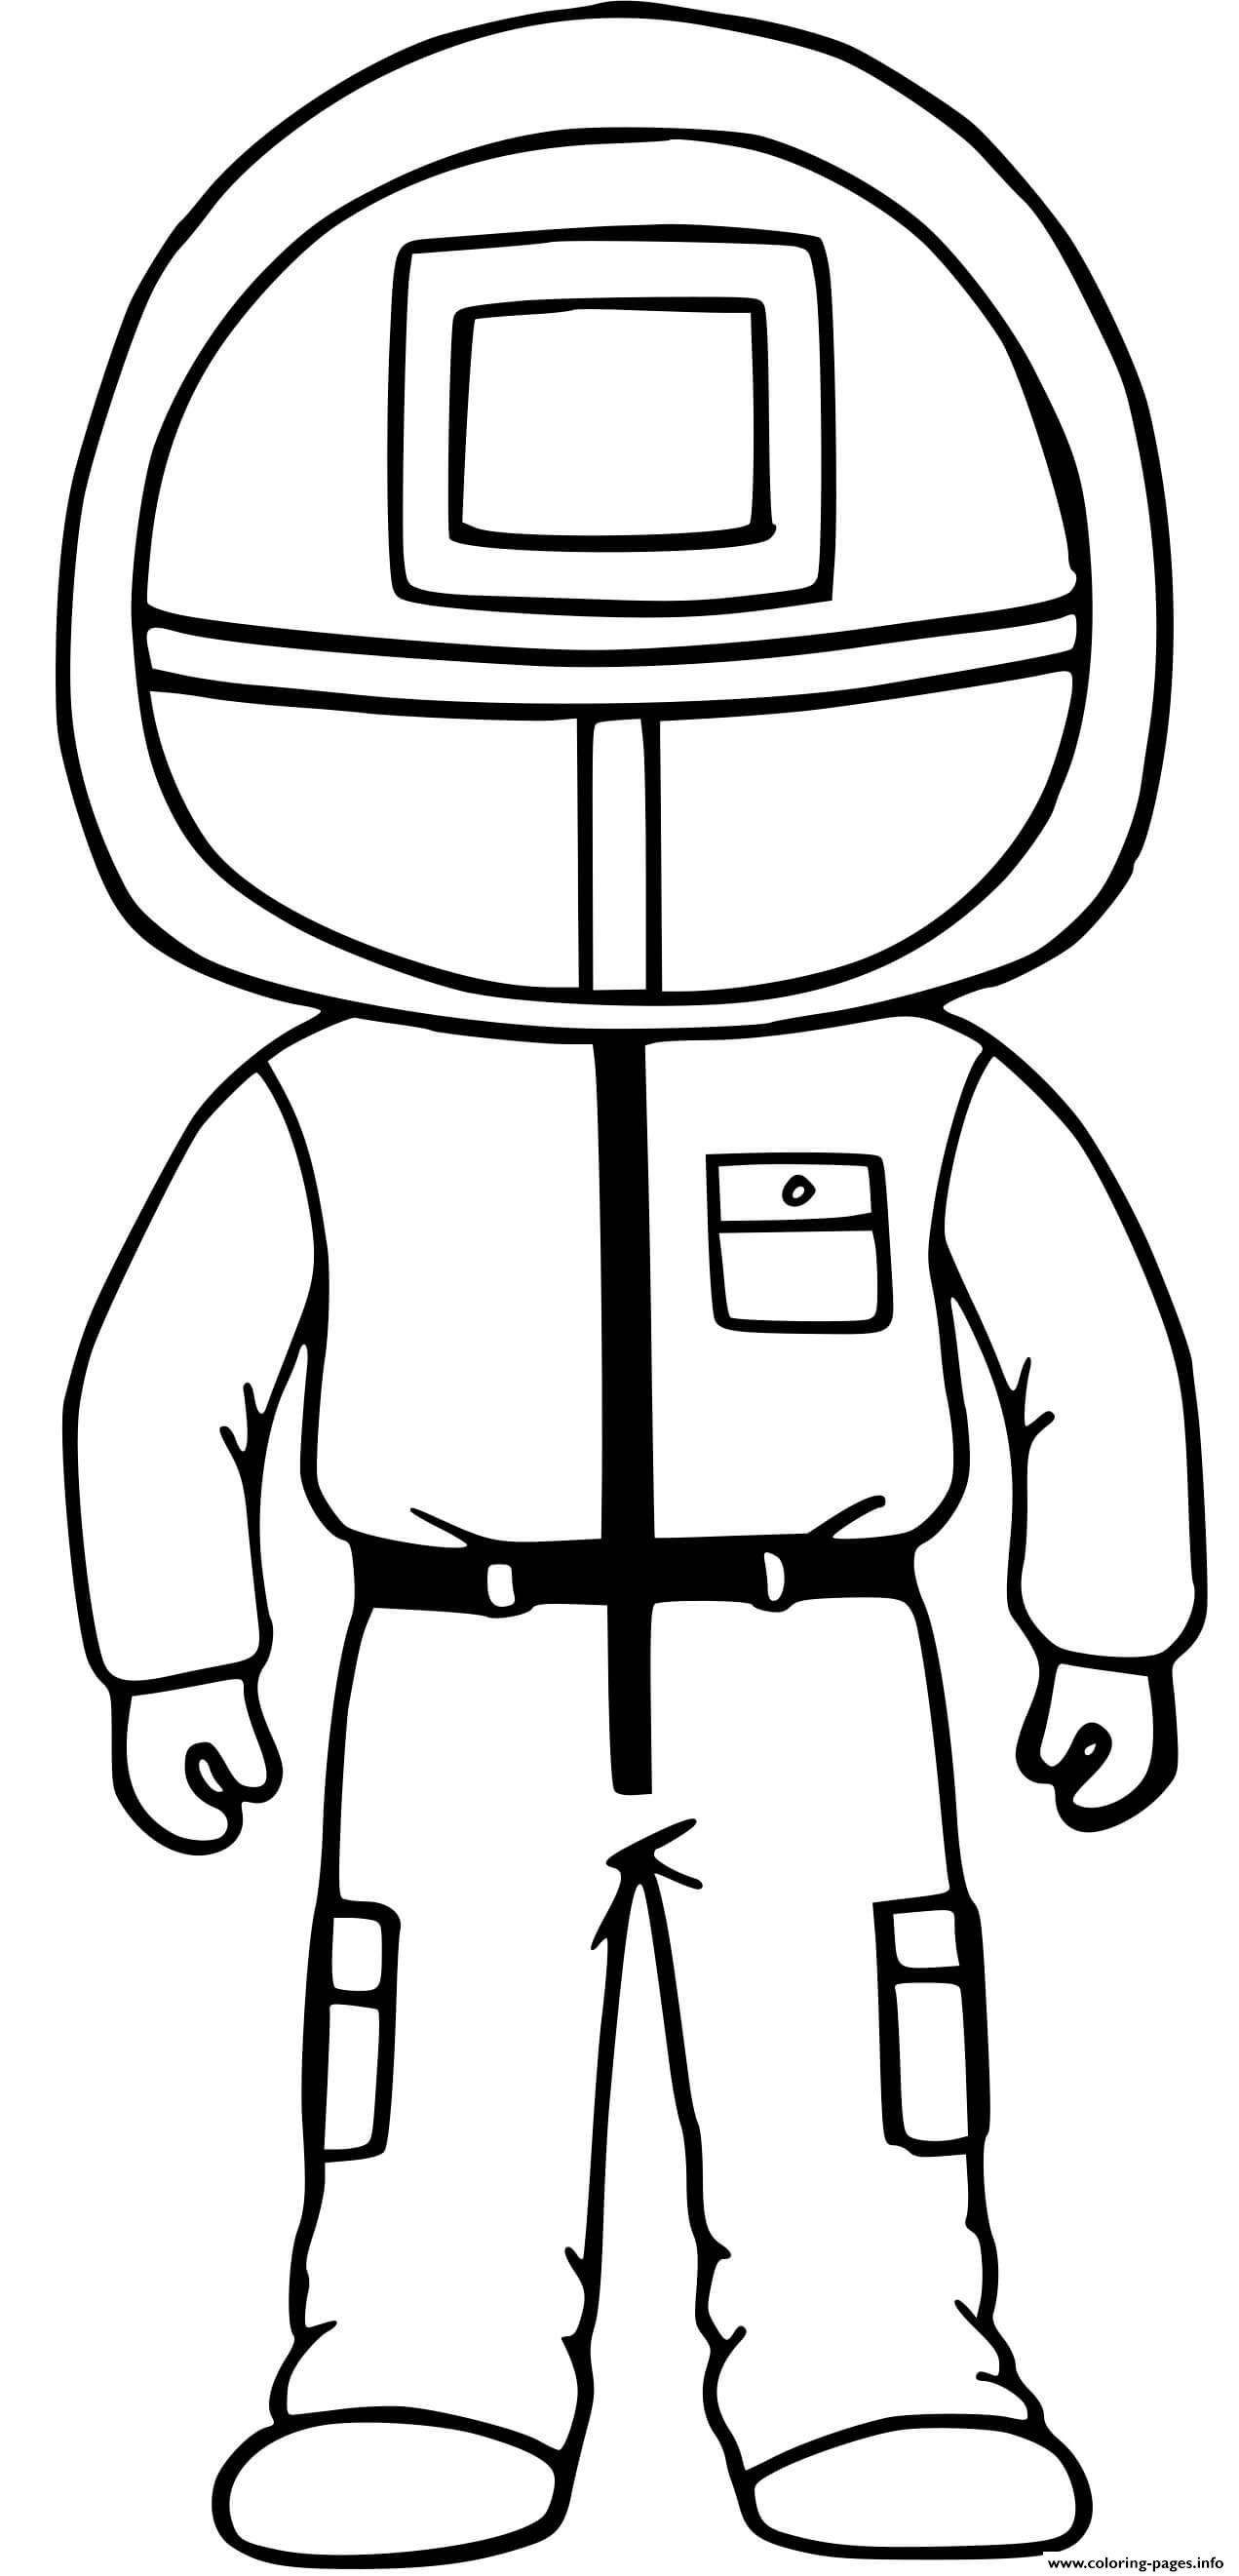 Squid game red guard uniform coloring page printable